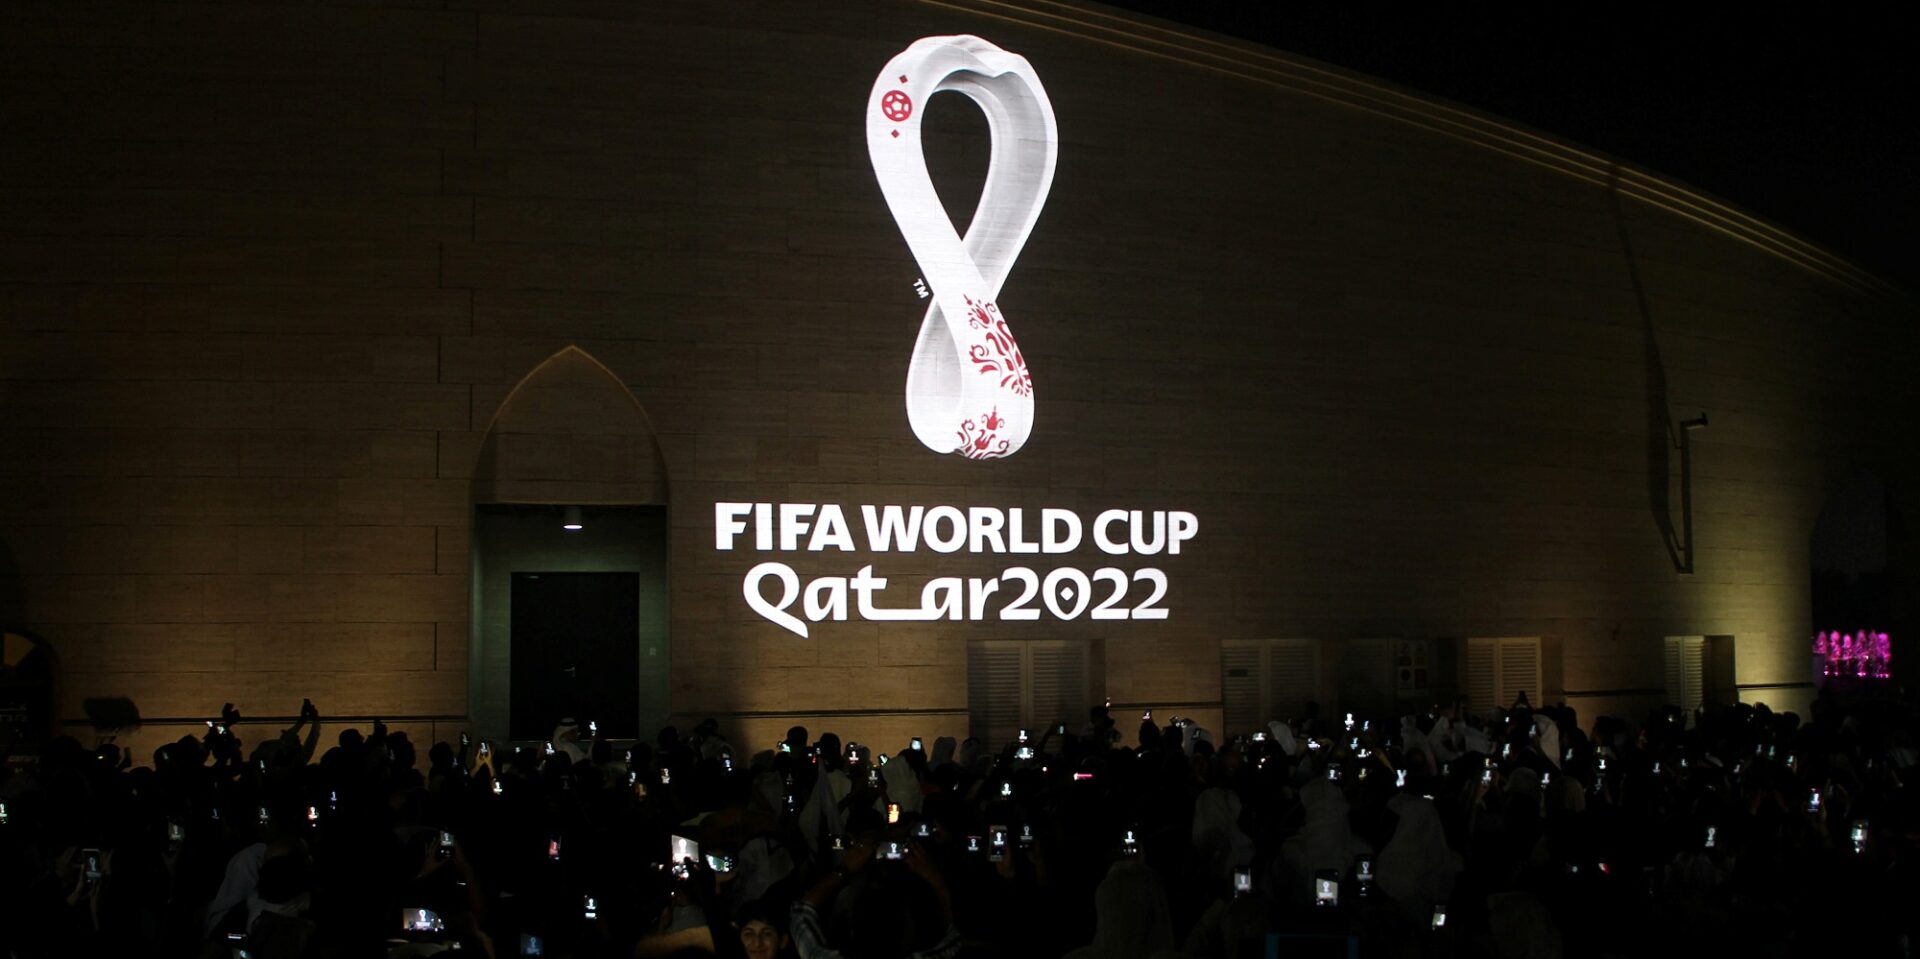 Why Qatar is hosting the World Cup and what it hopes to achieve with it